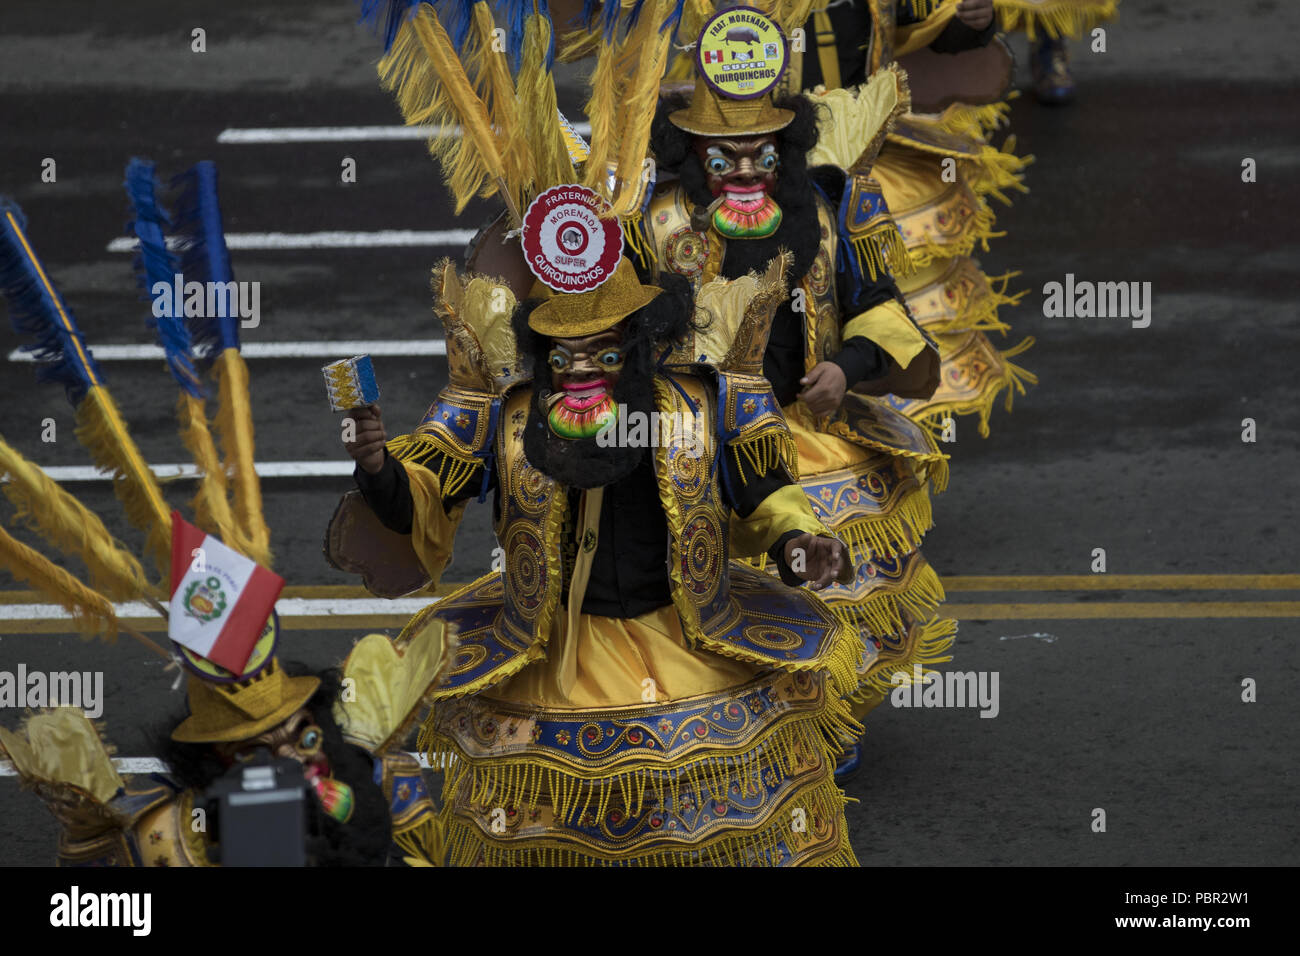 Lima, Lima, Peru. 29th July, 2018. Peruvian dancers seen performing at the military parade.Members of Peru's armed forces, coastguard, search & rescue, and police march in full uniform during the country's Gran Parada Militar. This parade always occurs the day after Peru's Independence Day marking the official end of festivities across the nation. Credit: Guillermo Gutierrez/SOPA Images/ZUMA Wire/Alamy Live News Stock Photo